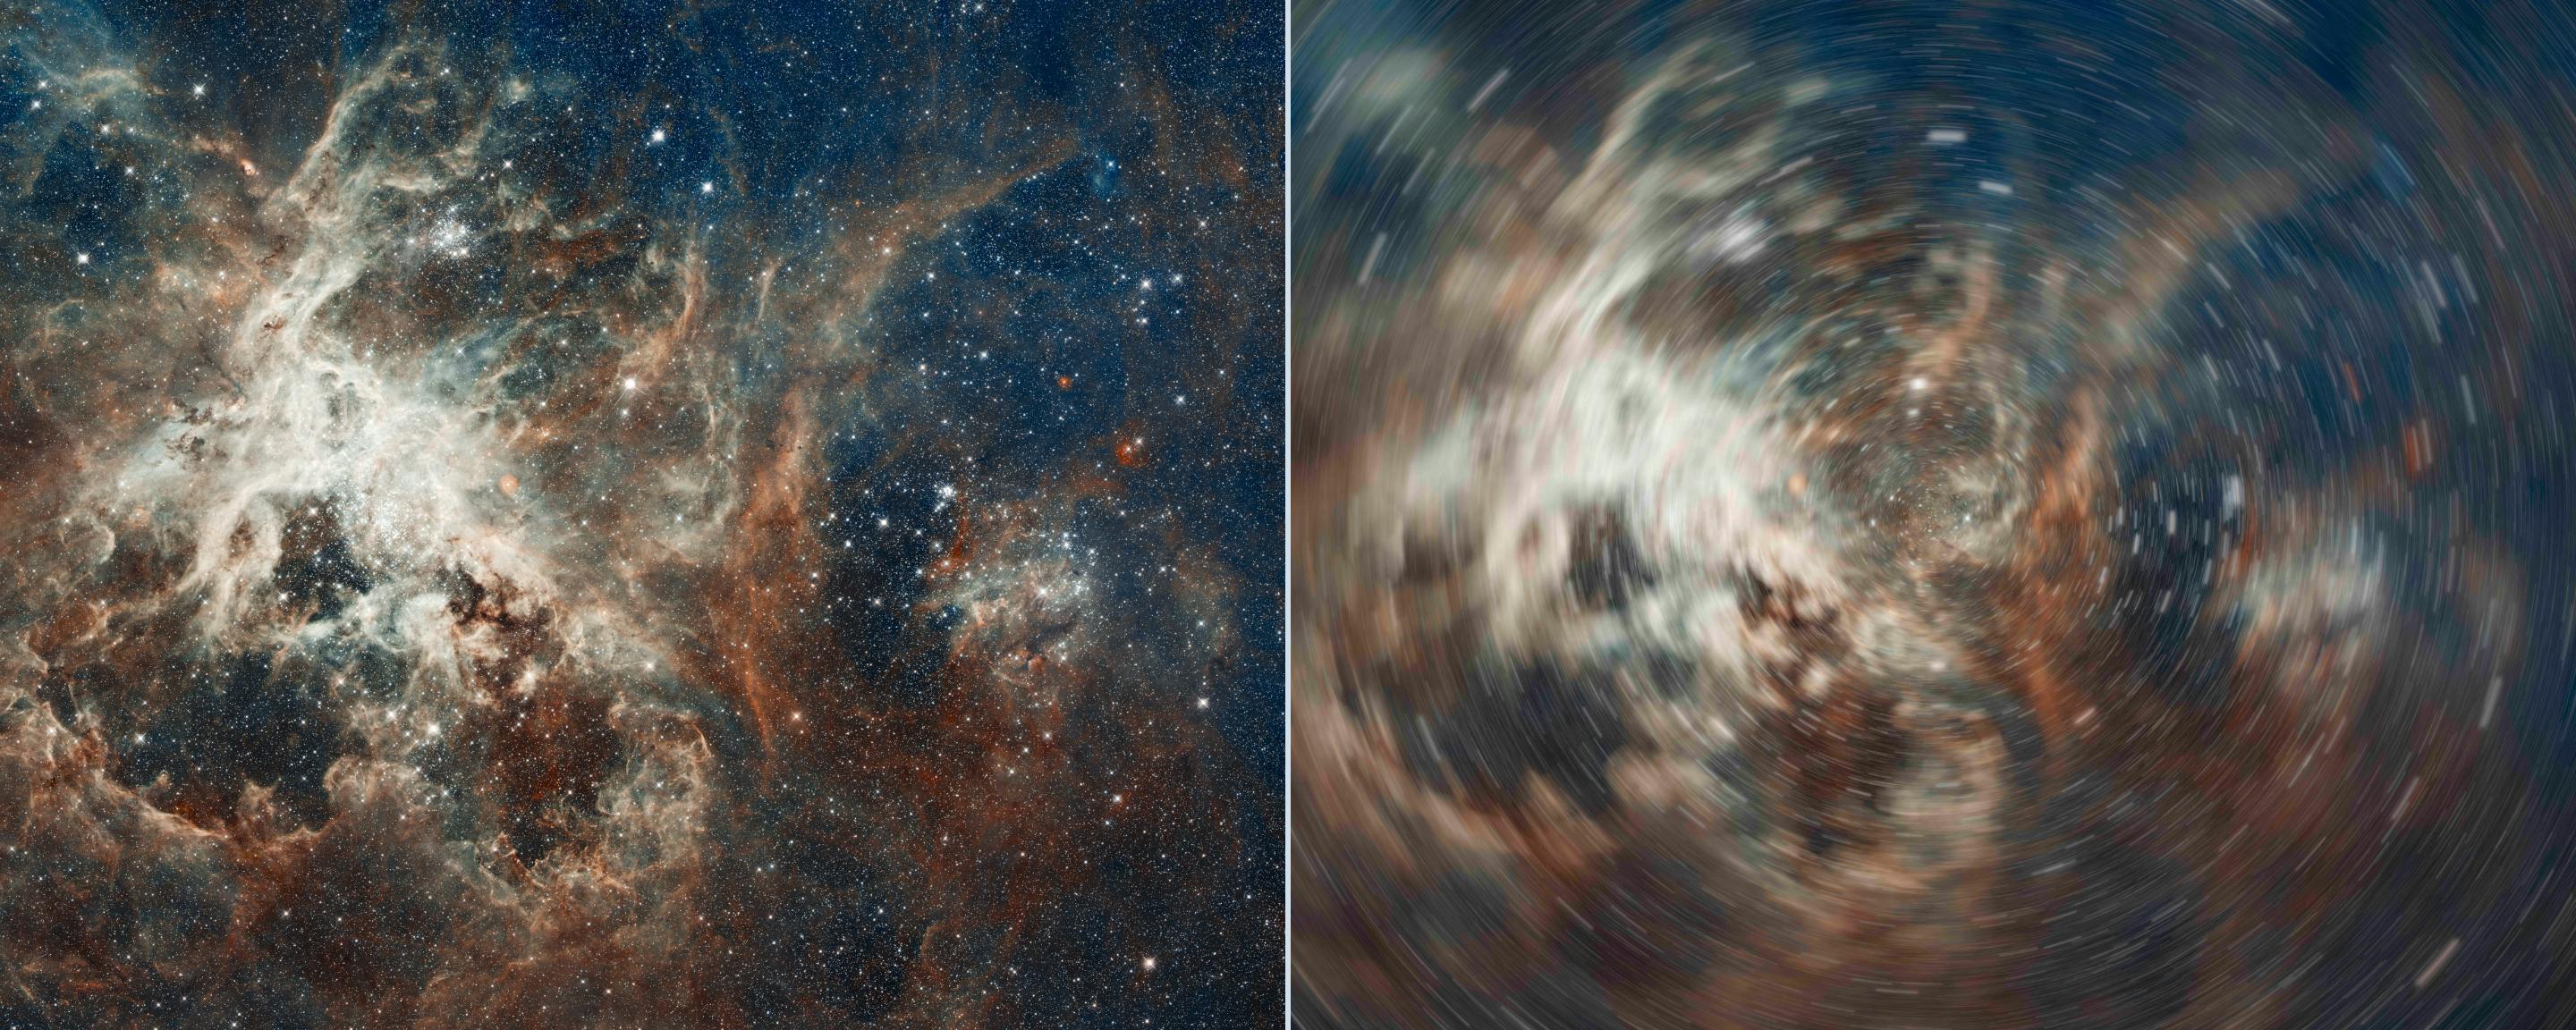 Image of a nebula before and after a circular motion blur is applied. I feel like I'm in a washing machine.